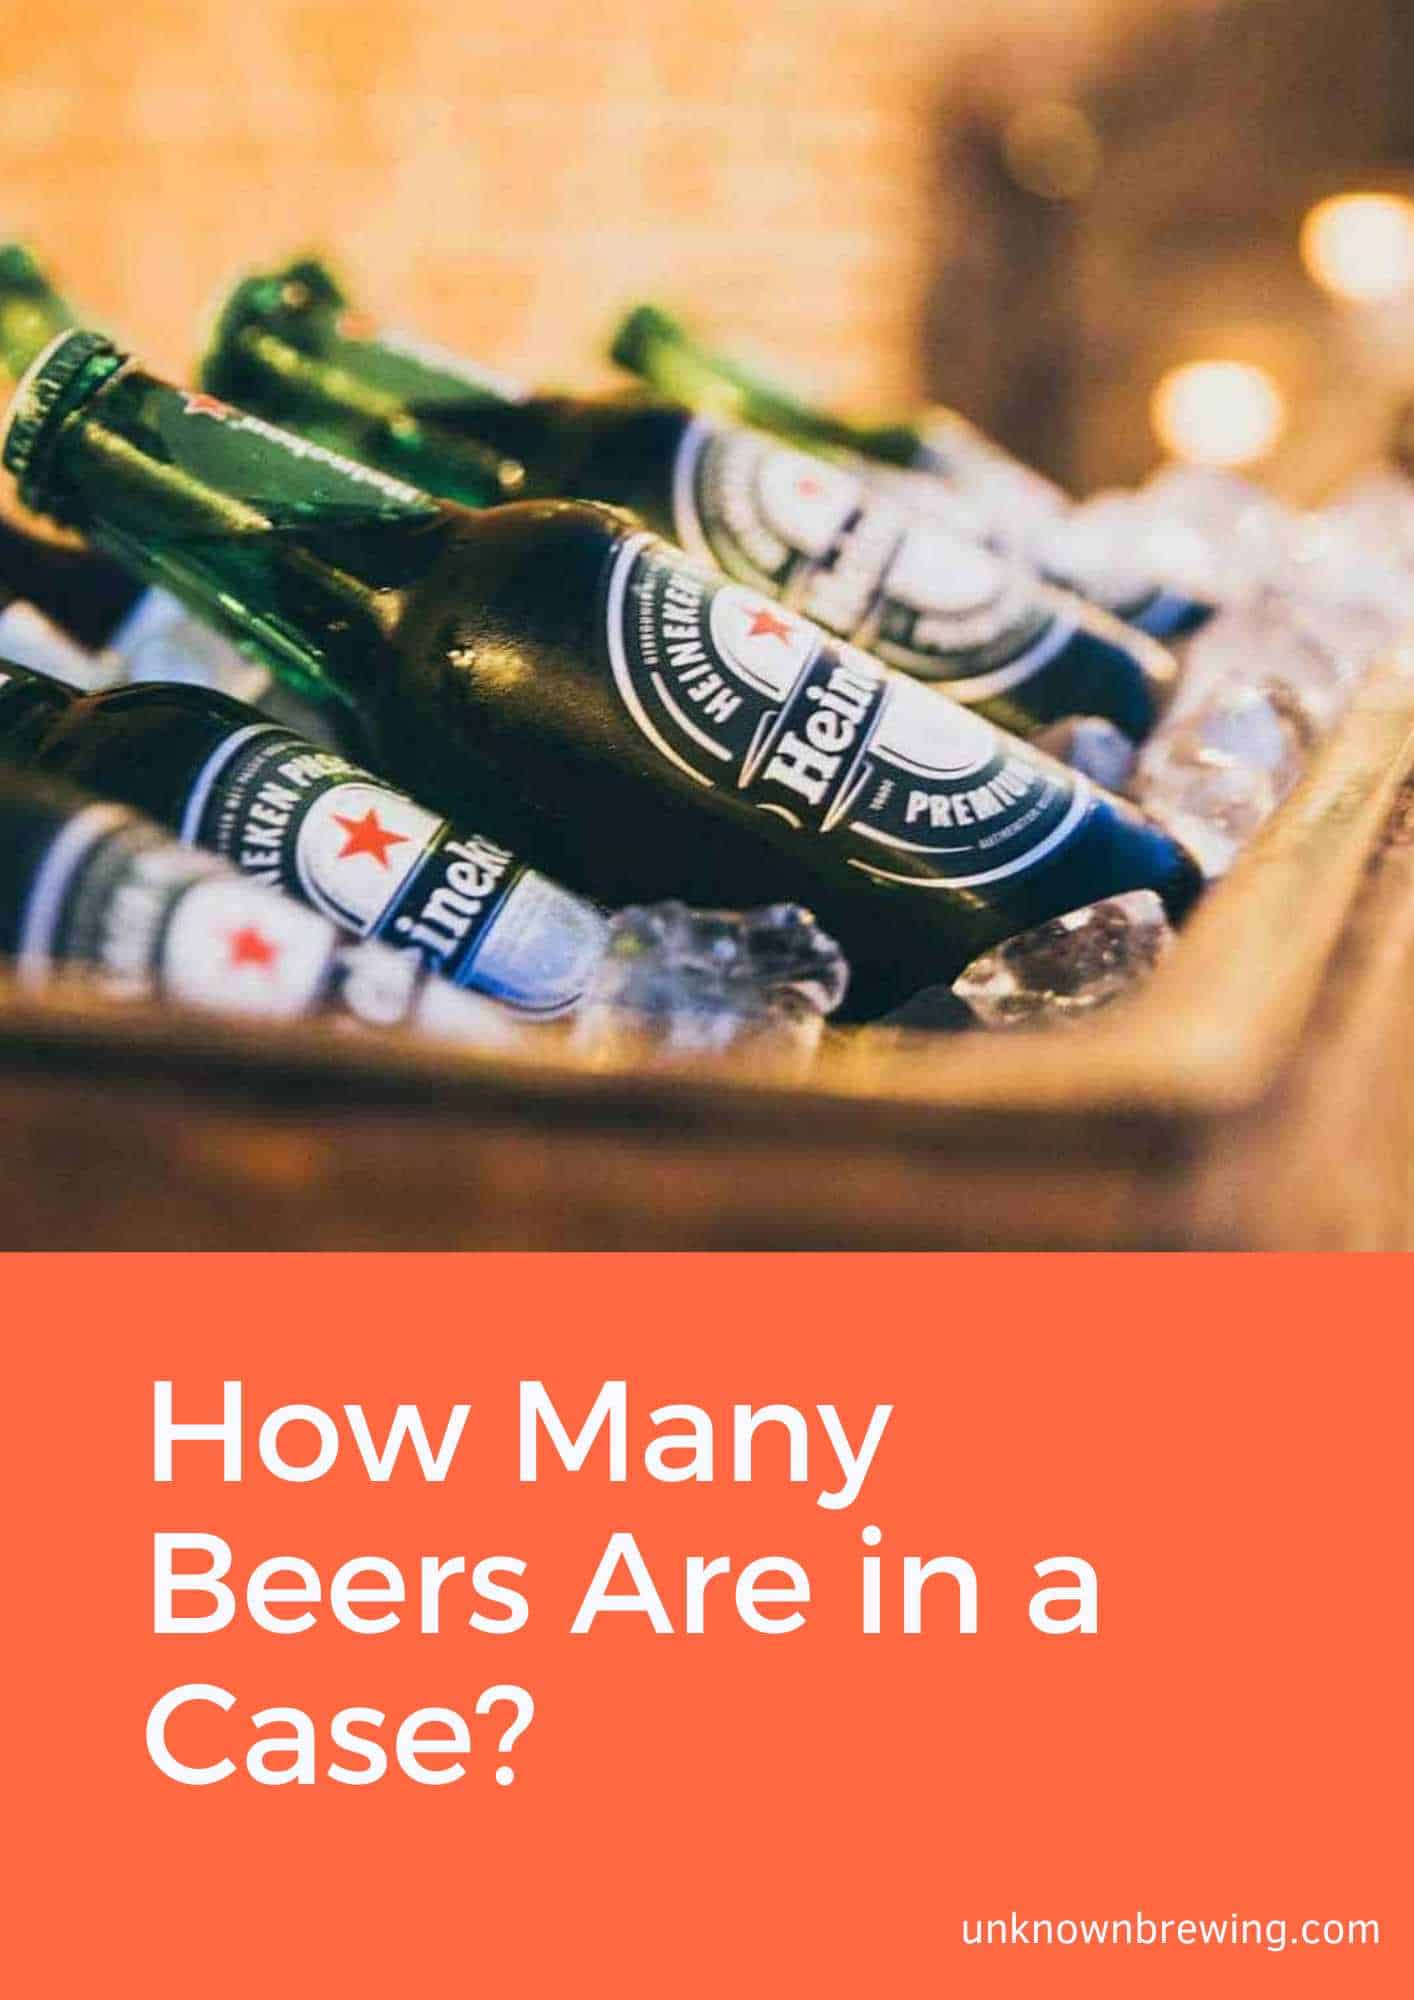 How Many Beers Are in a Case